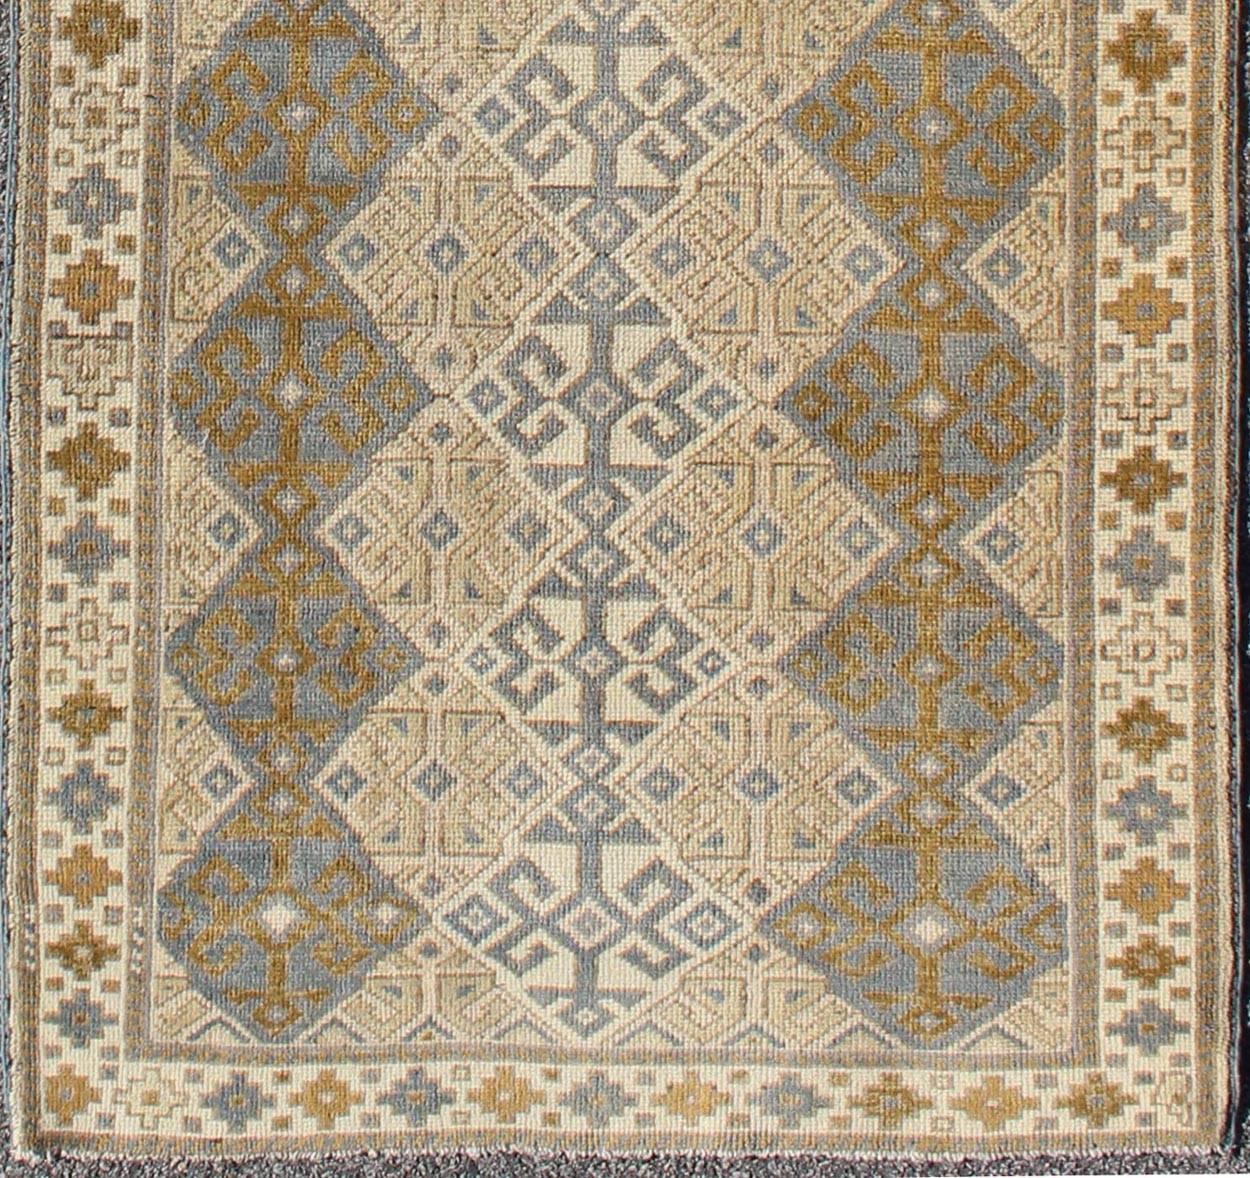 Measures: 3'3 X 9'11.
This rug is composed of alternating diamond motifs in different colorations that make the design more unique. The piece features, Gray blue, Camel, brown, cream and medium blue colors. The border is a Greek key motif that